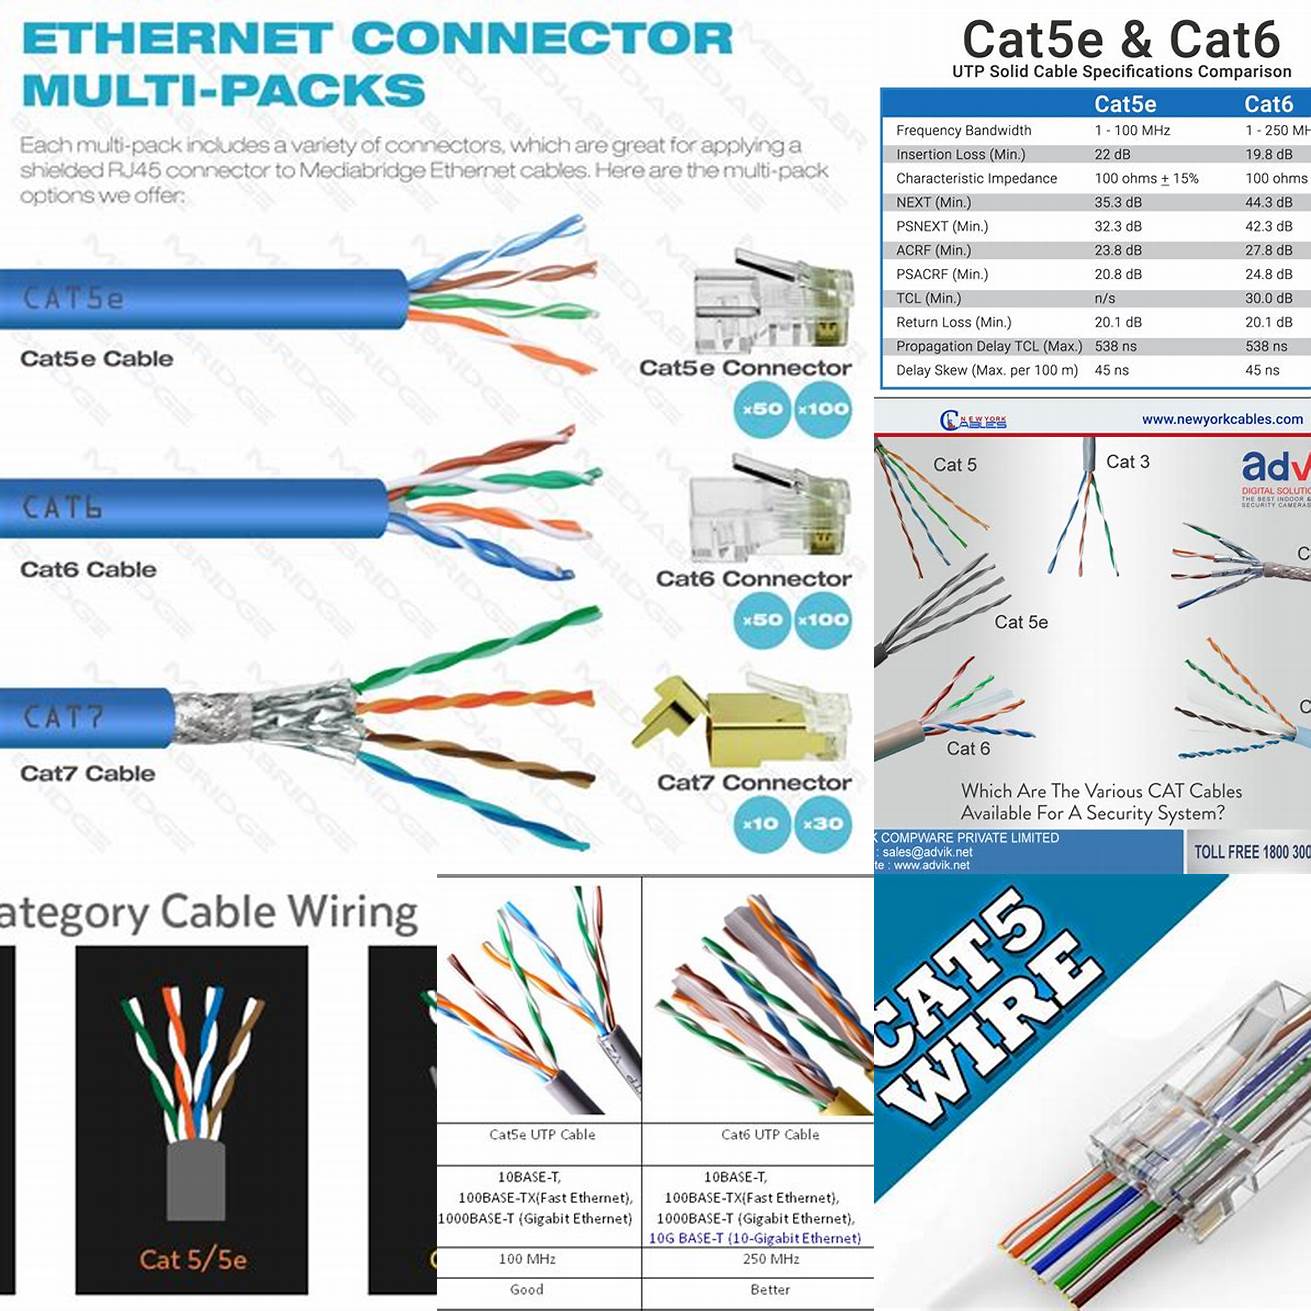 3 Cat 5 cables have a bandwidth of 100MHz